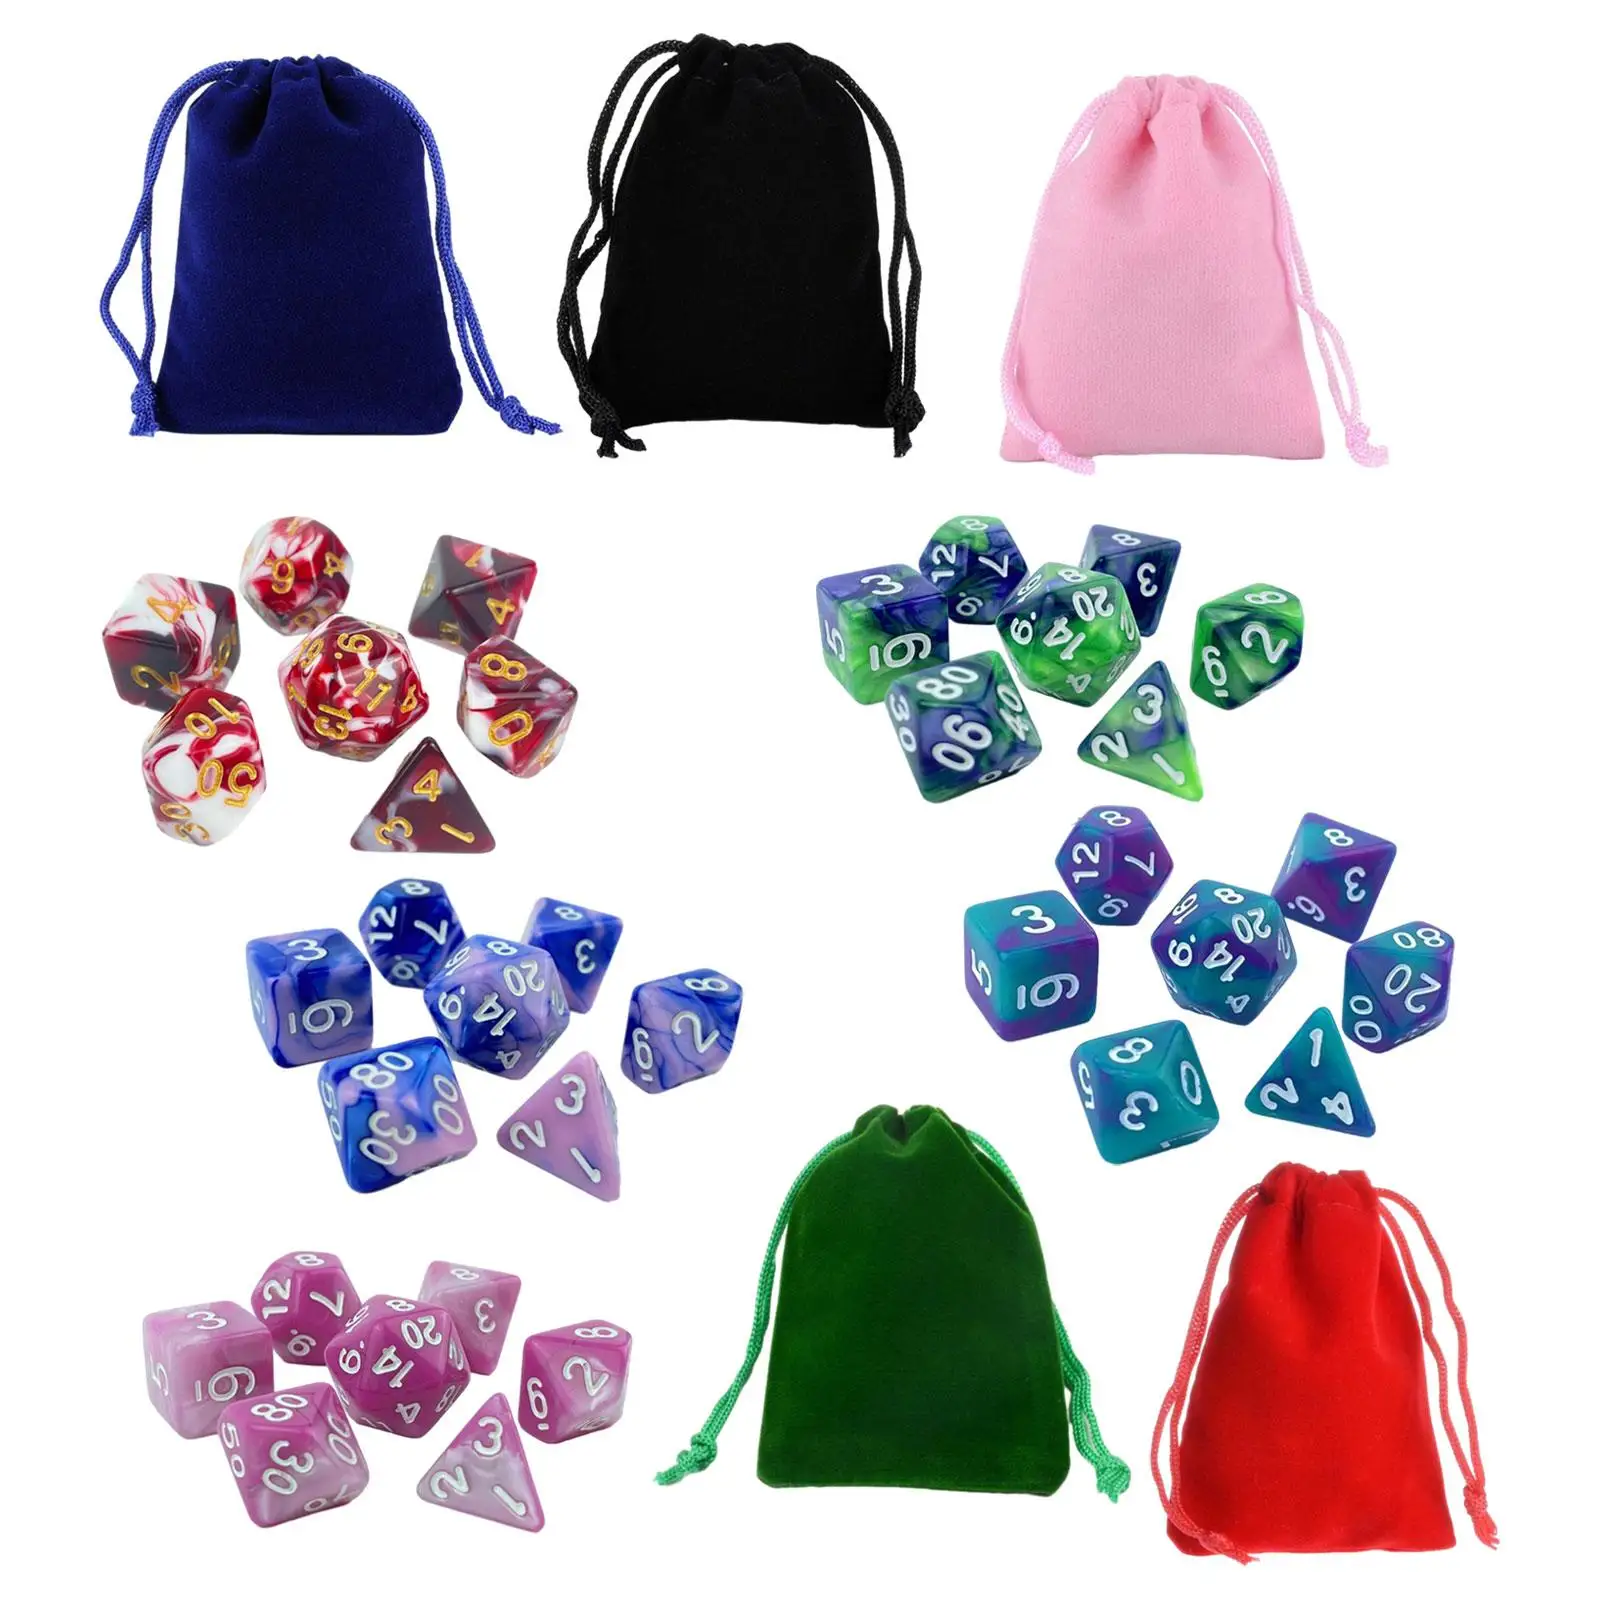 35x Polyhedral Dices Set with Drawstring Bags Family Table Game Family Games Accessaries for Party Supplies Wedding Cafe